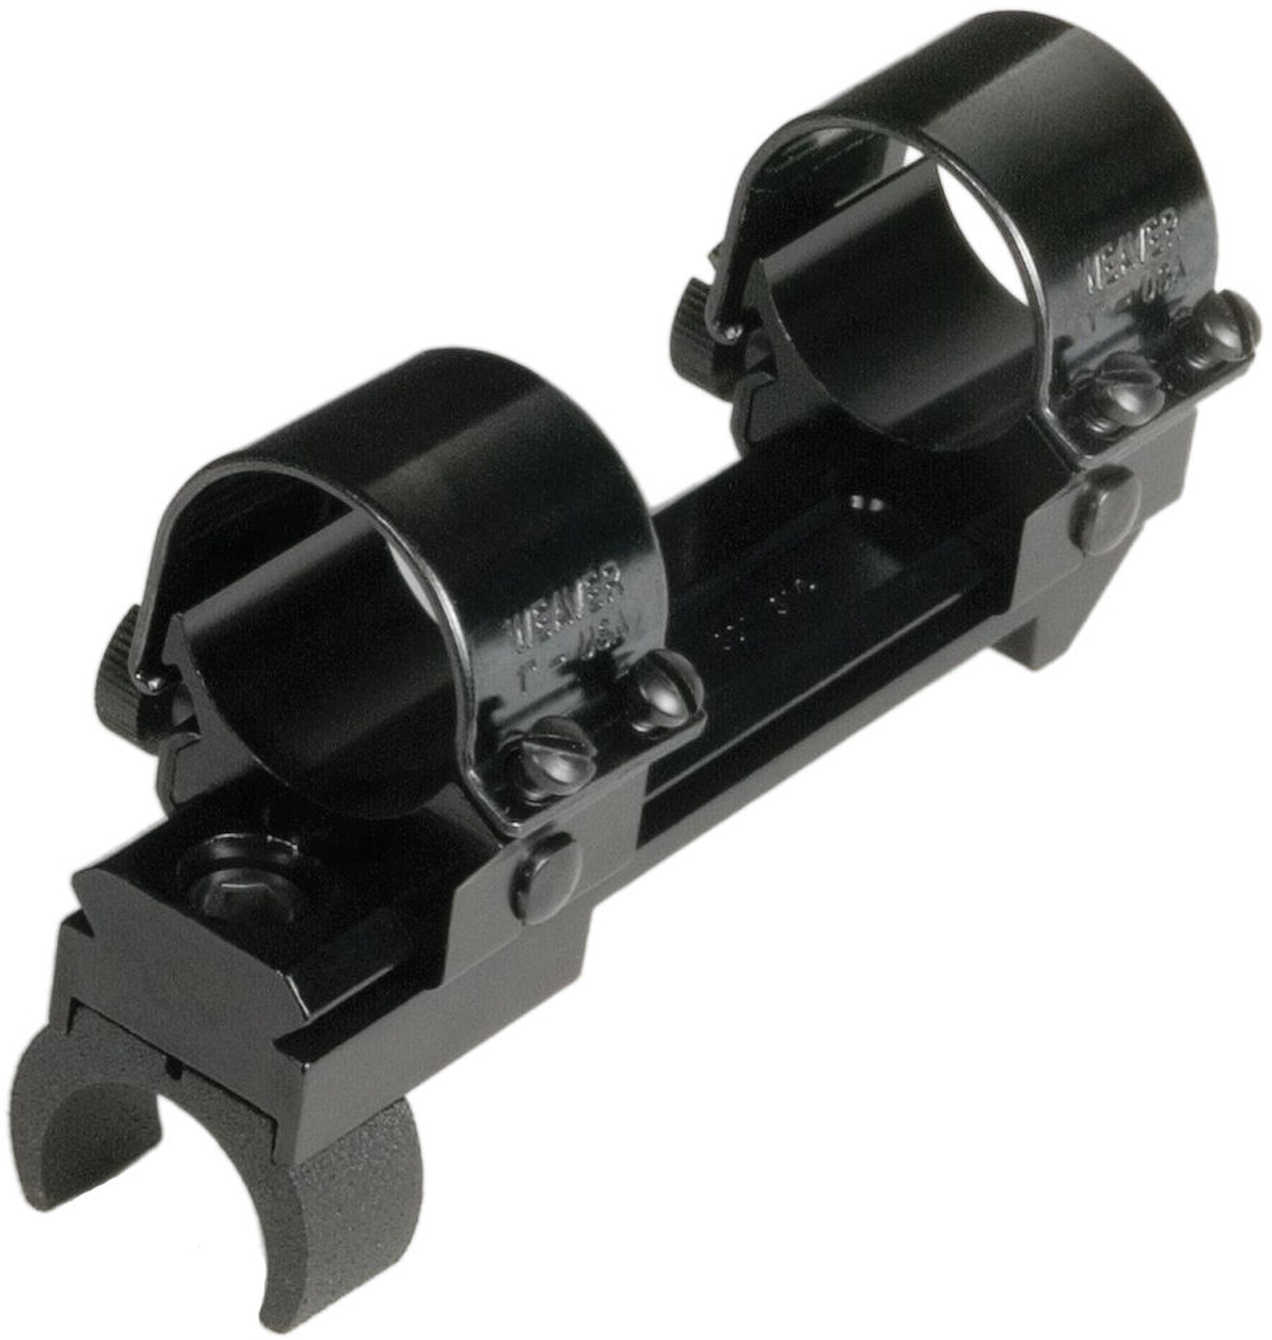 Simmons Weaver Mount/Base System With Medium Rings For Ruger® Blackhawk/Super Md: 48601